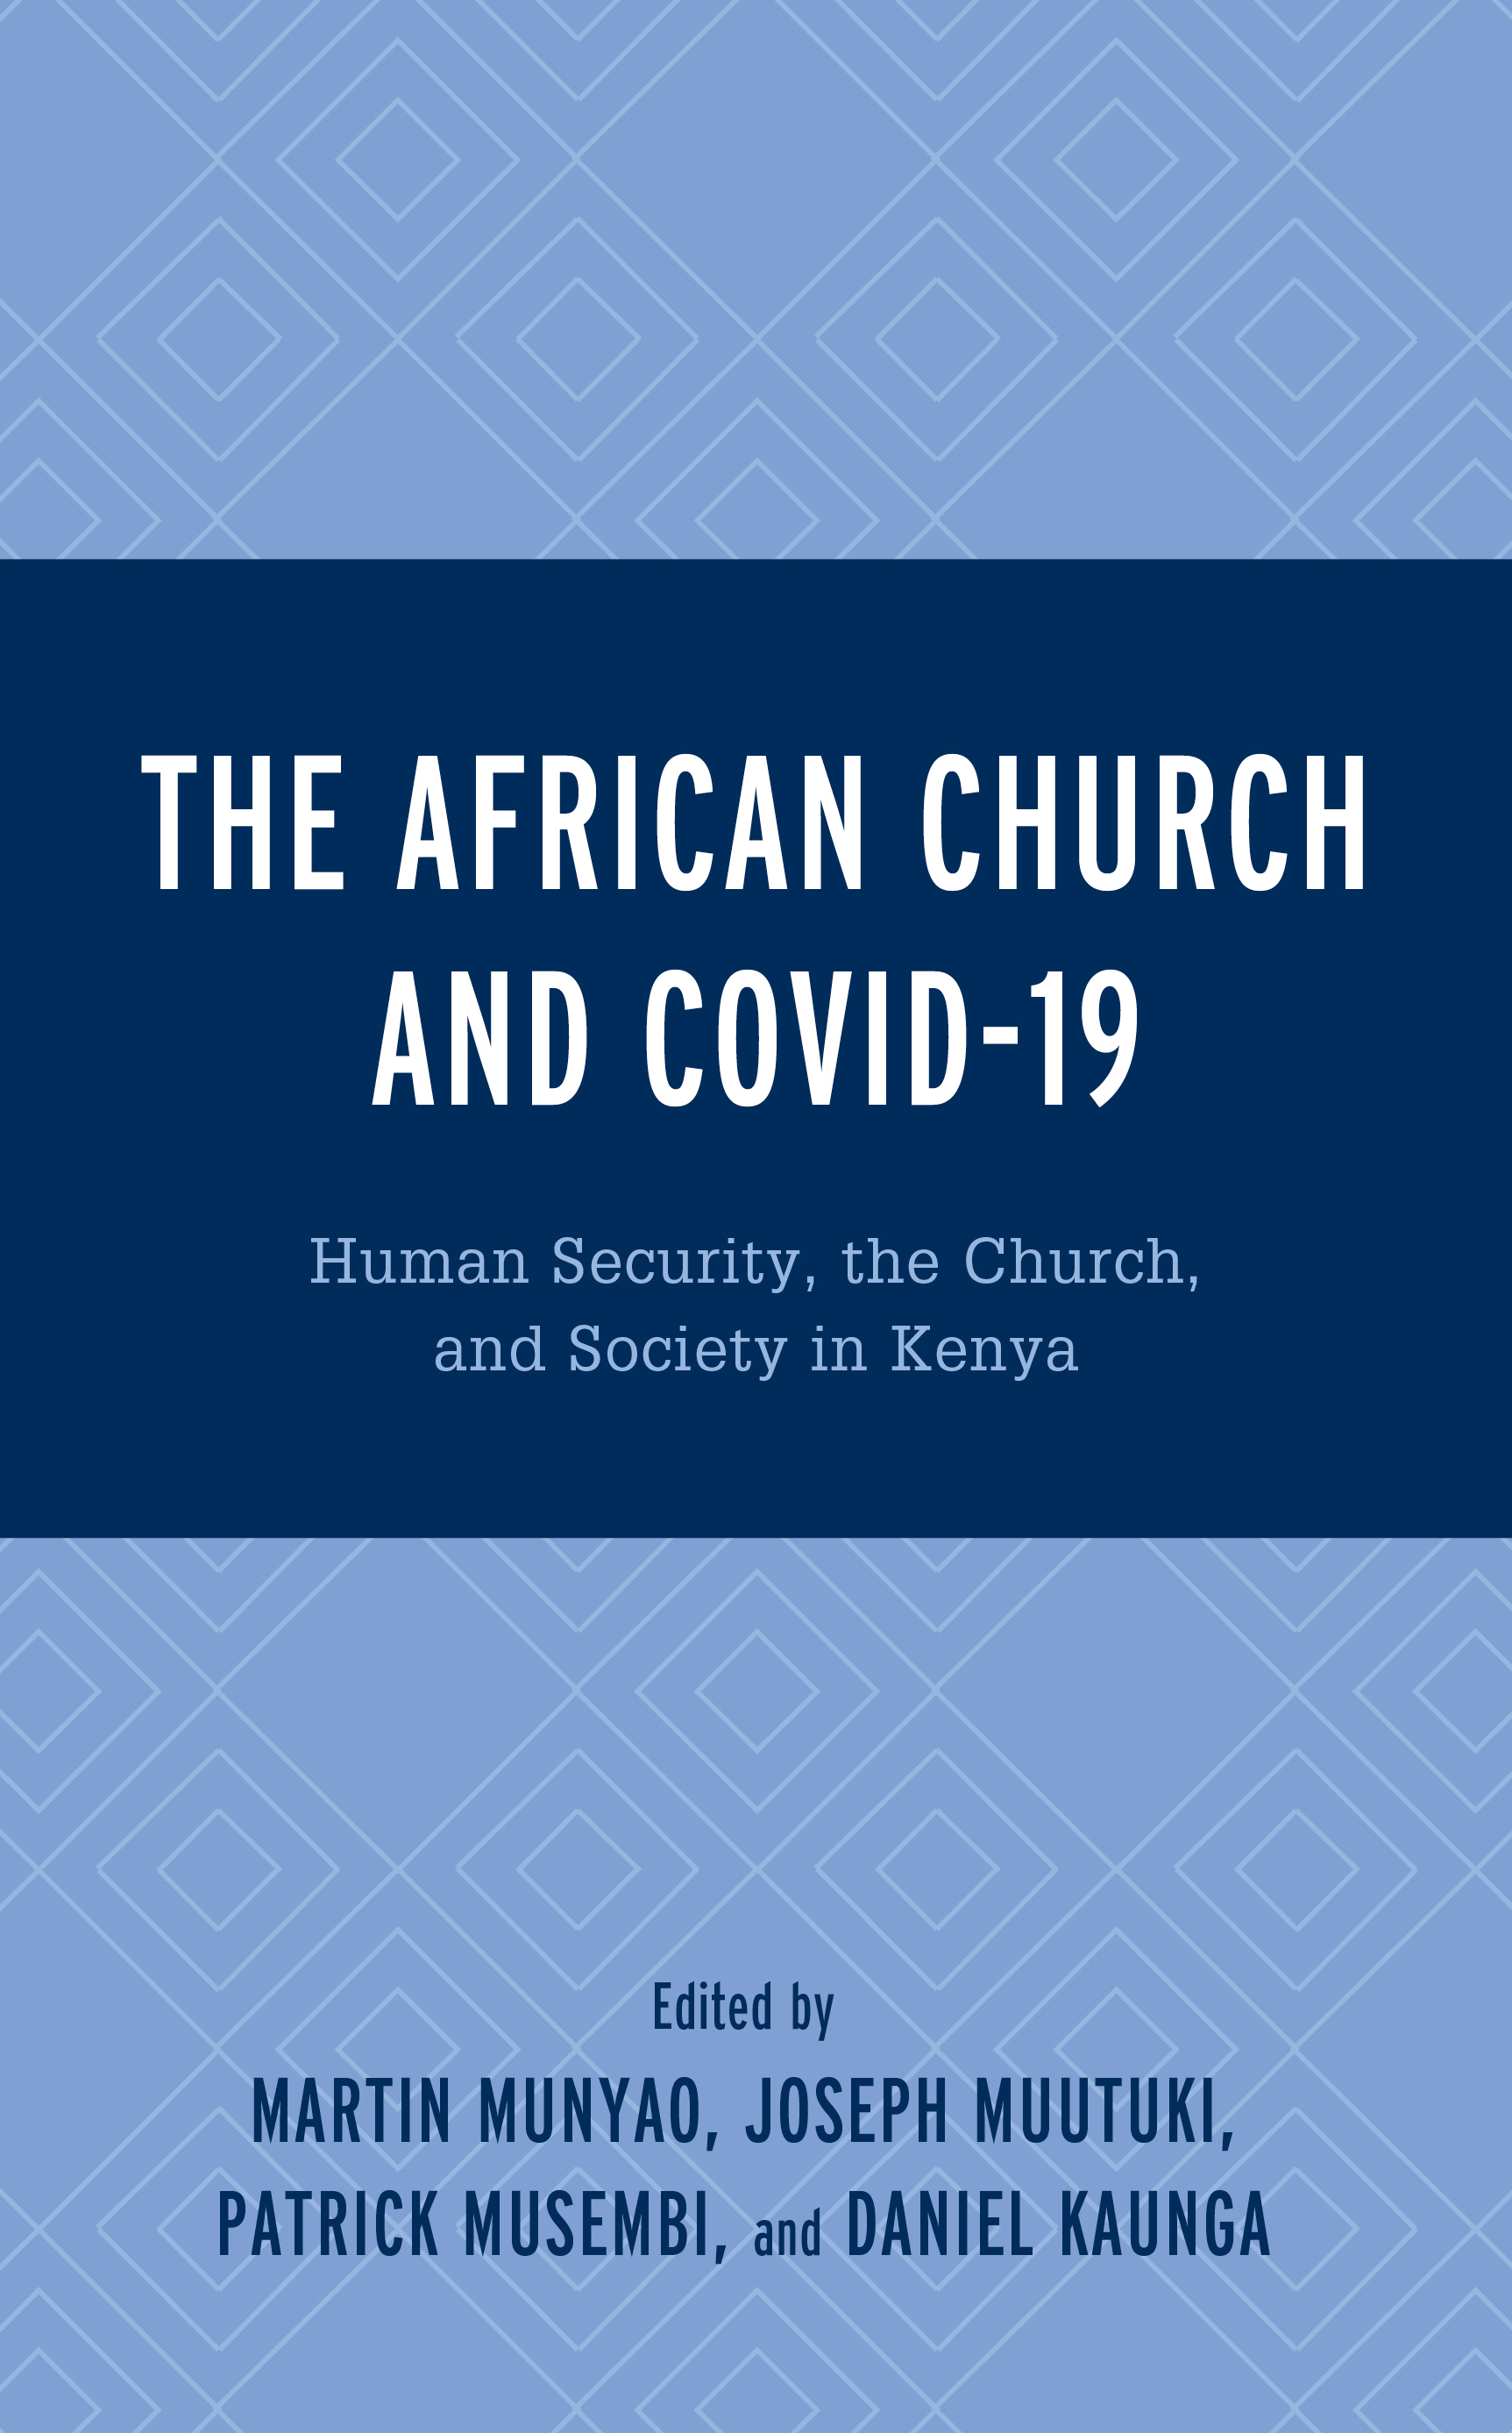 The African Church and COVID-19: Human Security, the Church, and Society in Kenya